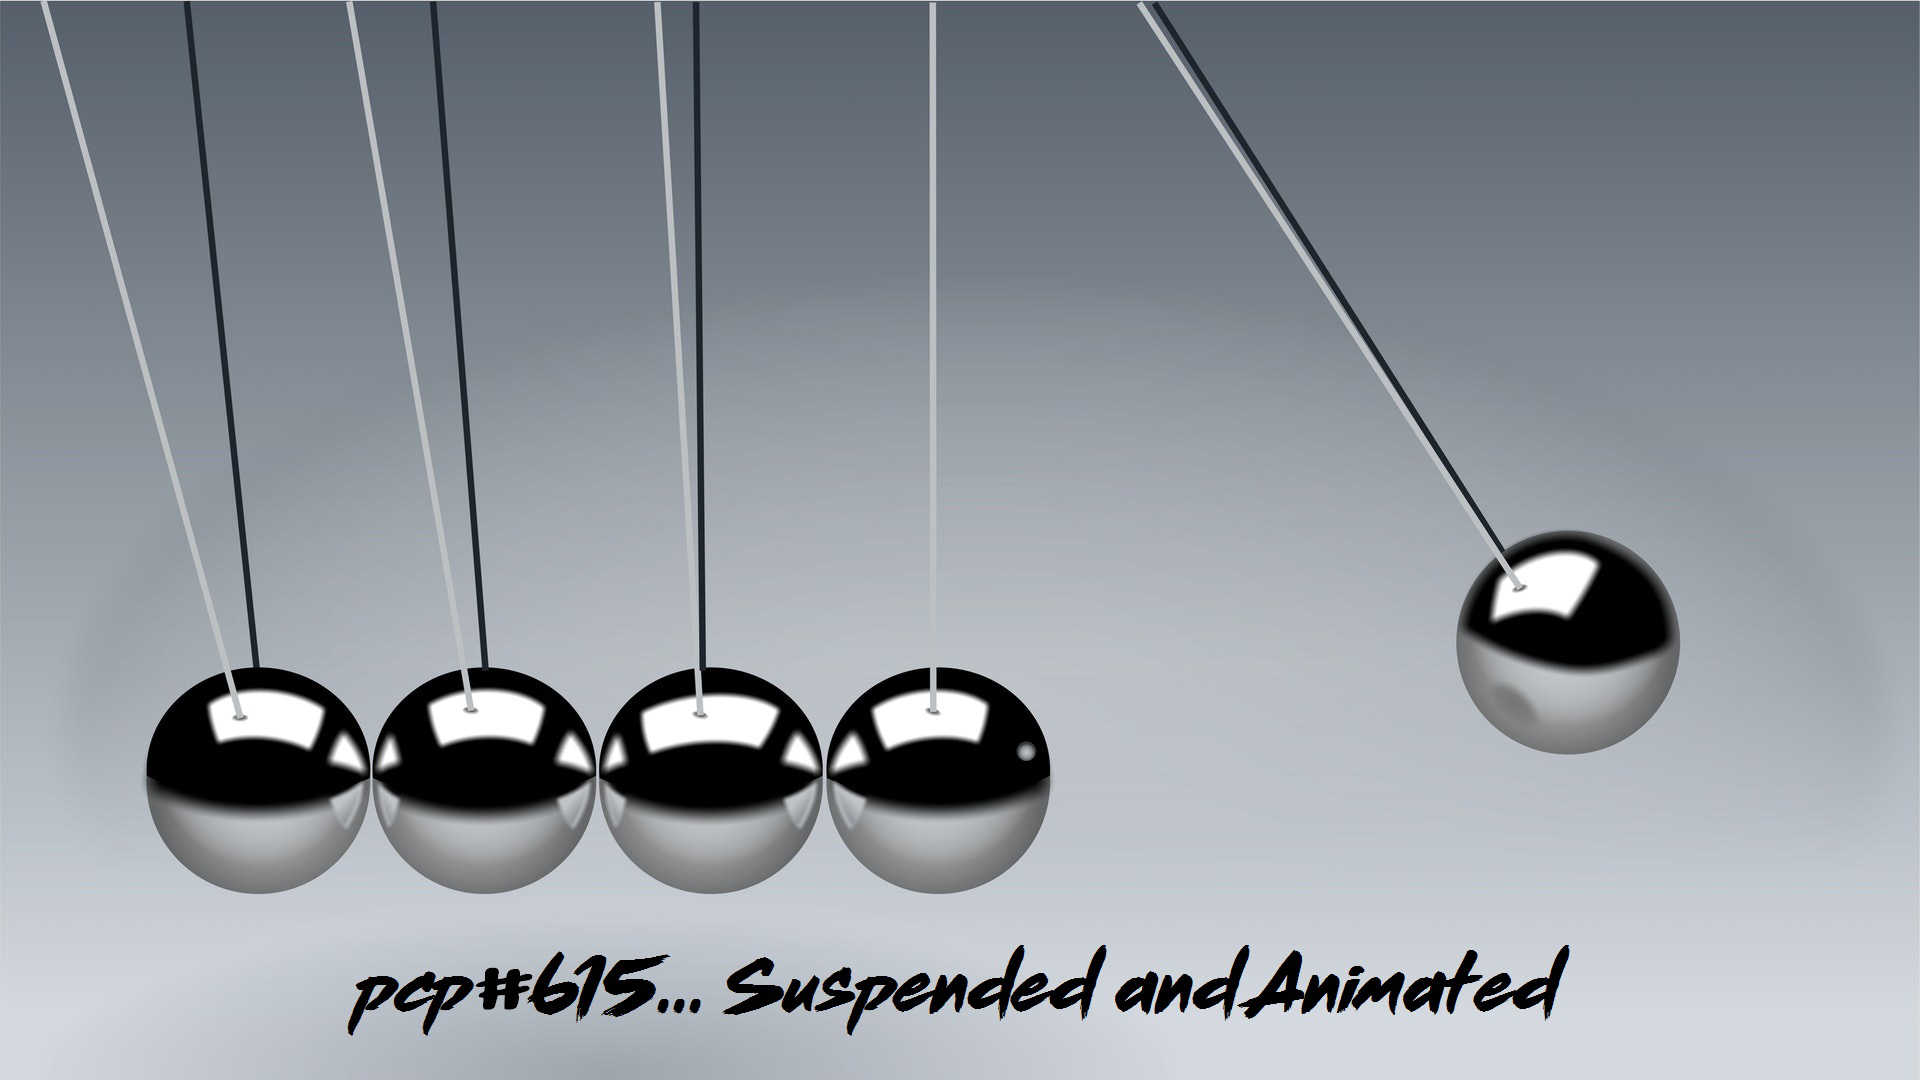 PCP#615... Suspended and Animated ....